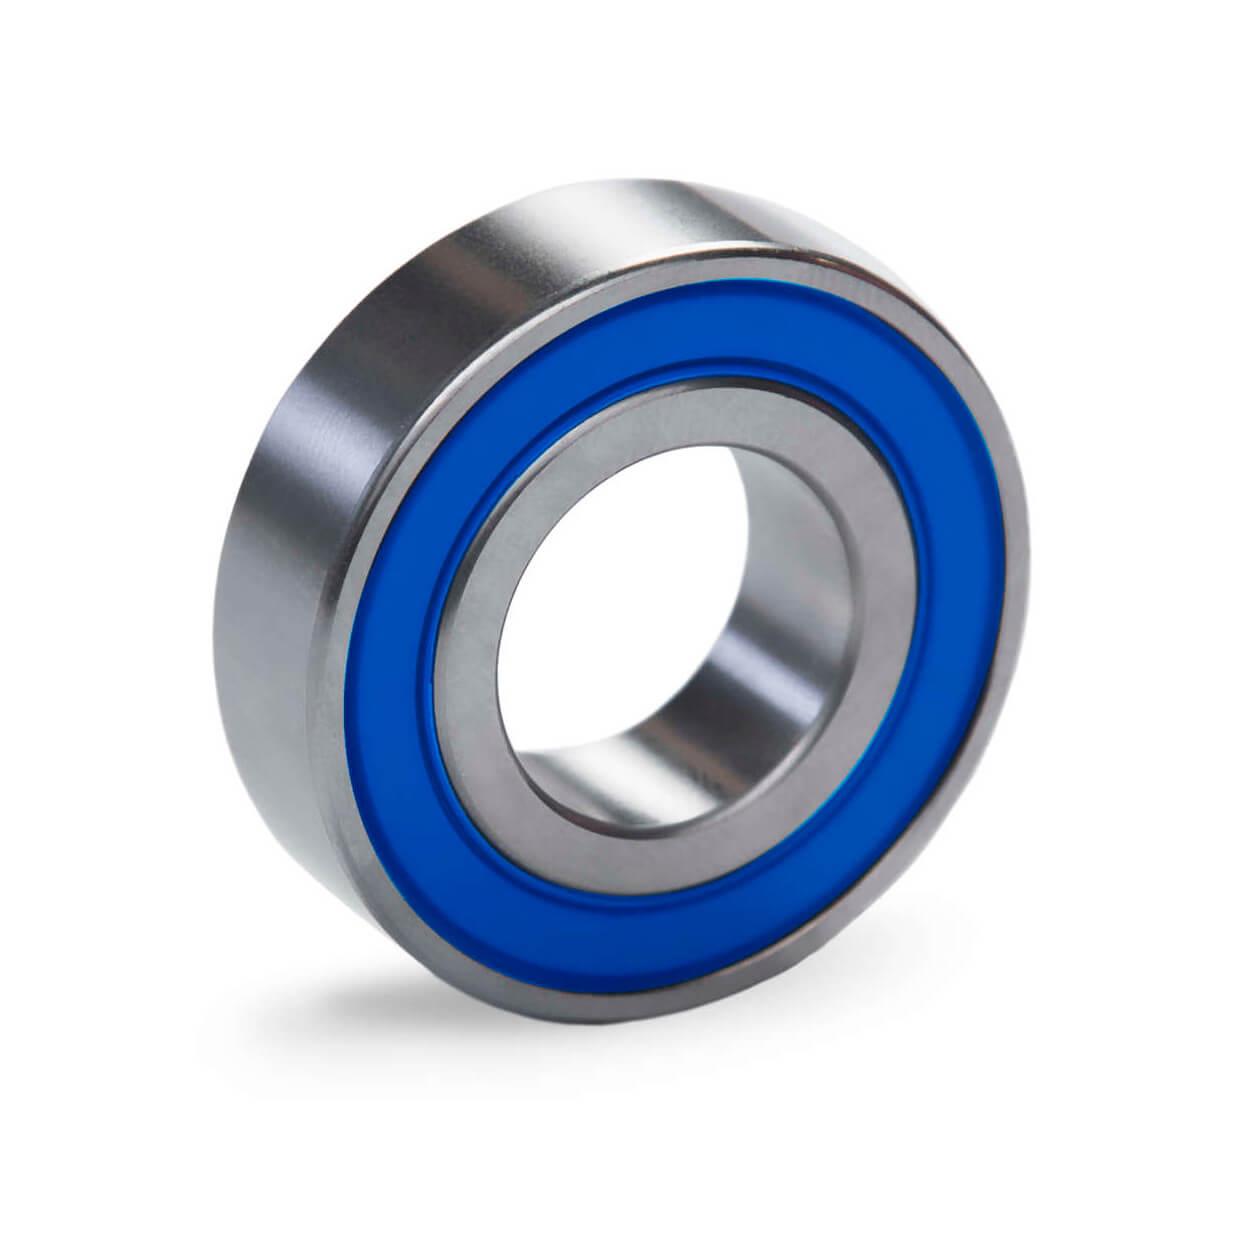 Blueseal Bike Bearings™ | MAX Complement Frame Pivot | All Sizes & Codes - Trailvision - Bicycle Bearing Suppliers